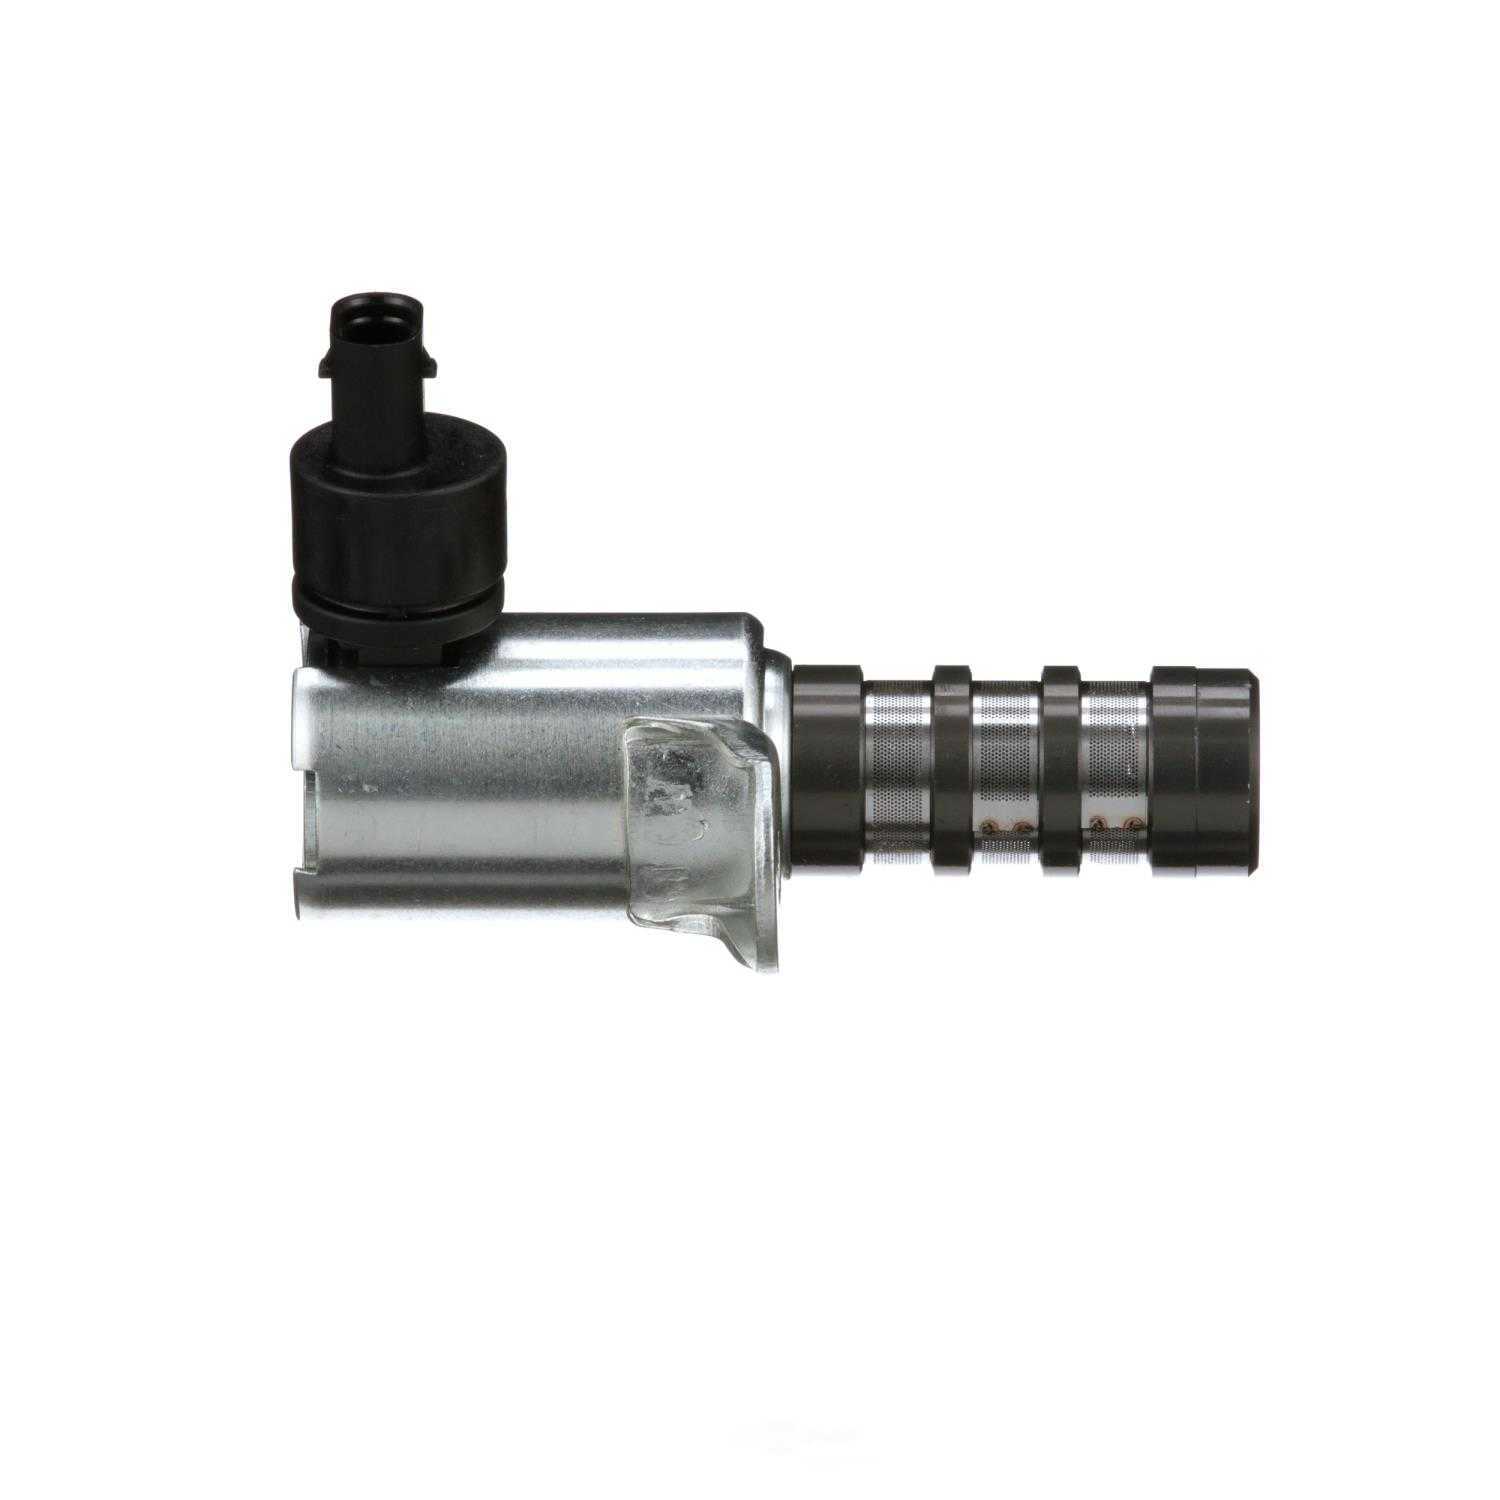 STANDARD MOTOR PRODUCTS - Engine Variable Valve Lift Eccentric Shaft Actuator - STA VVT108